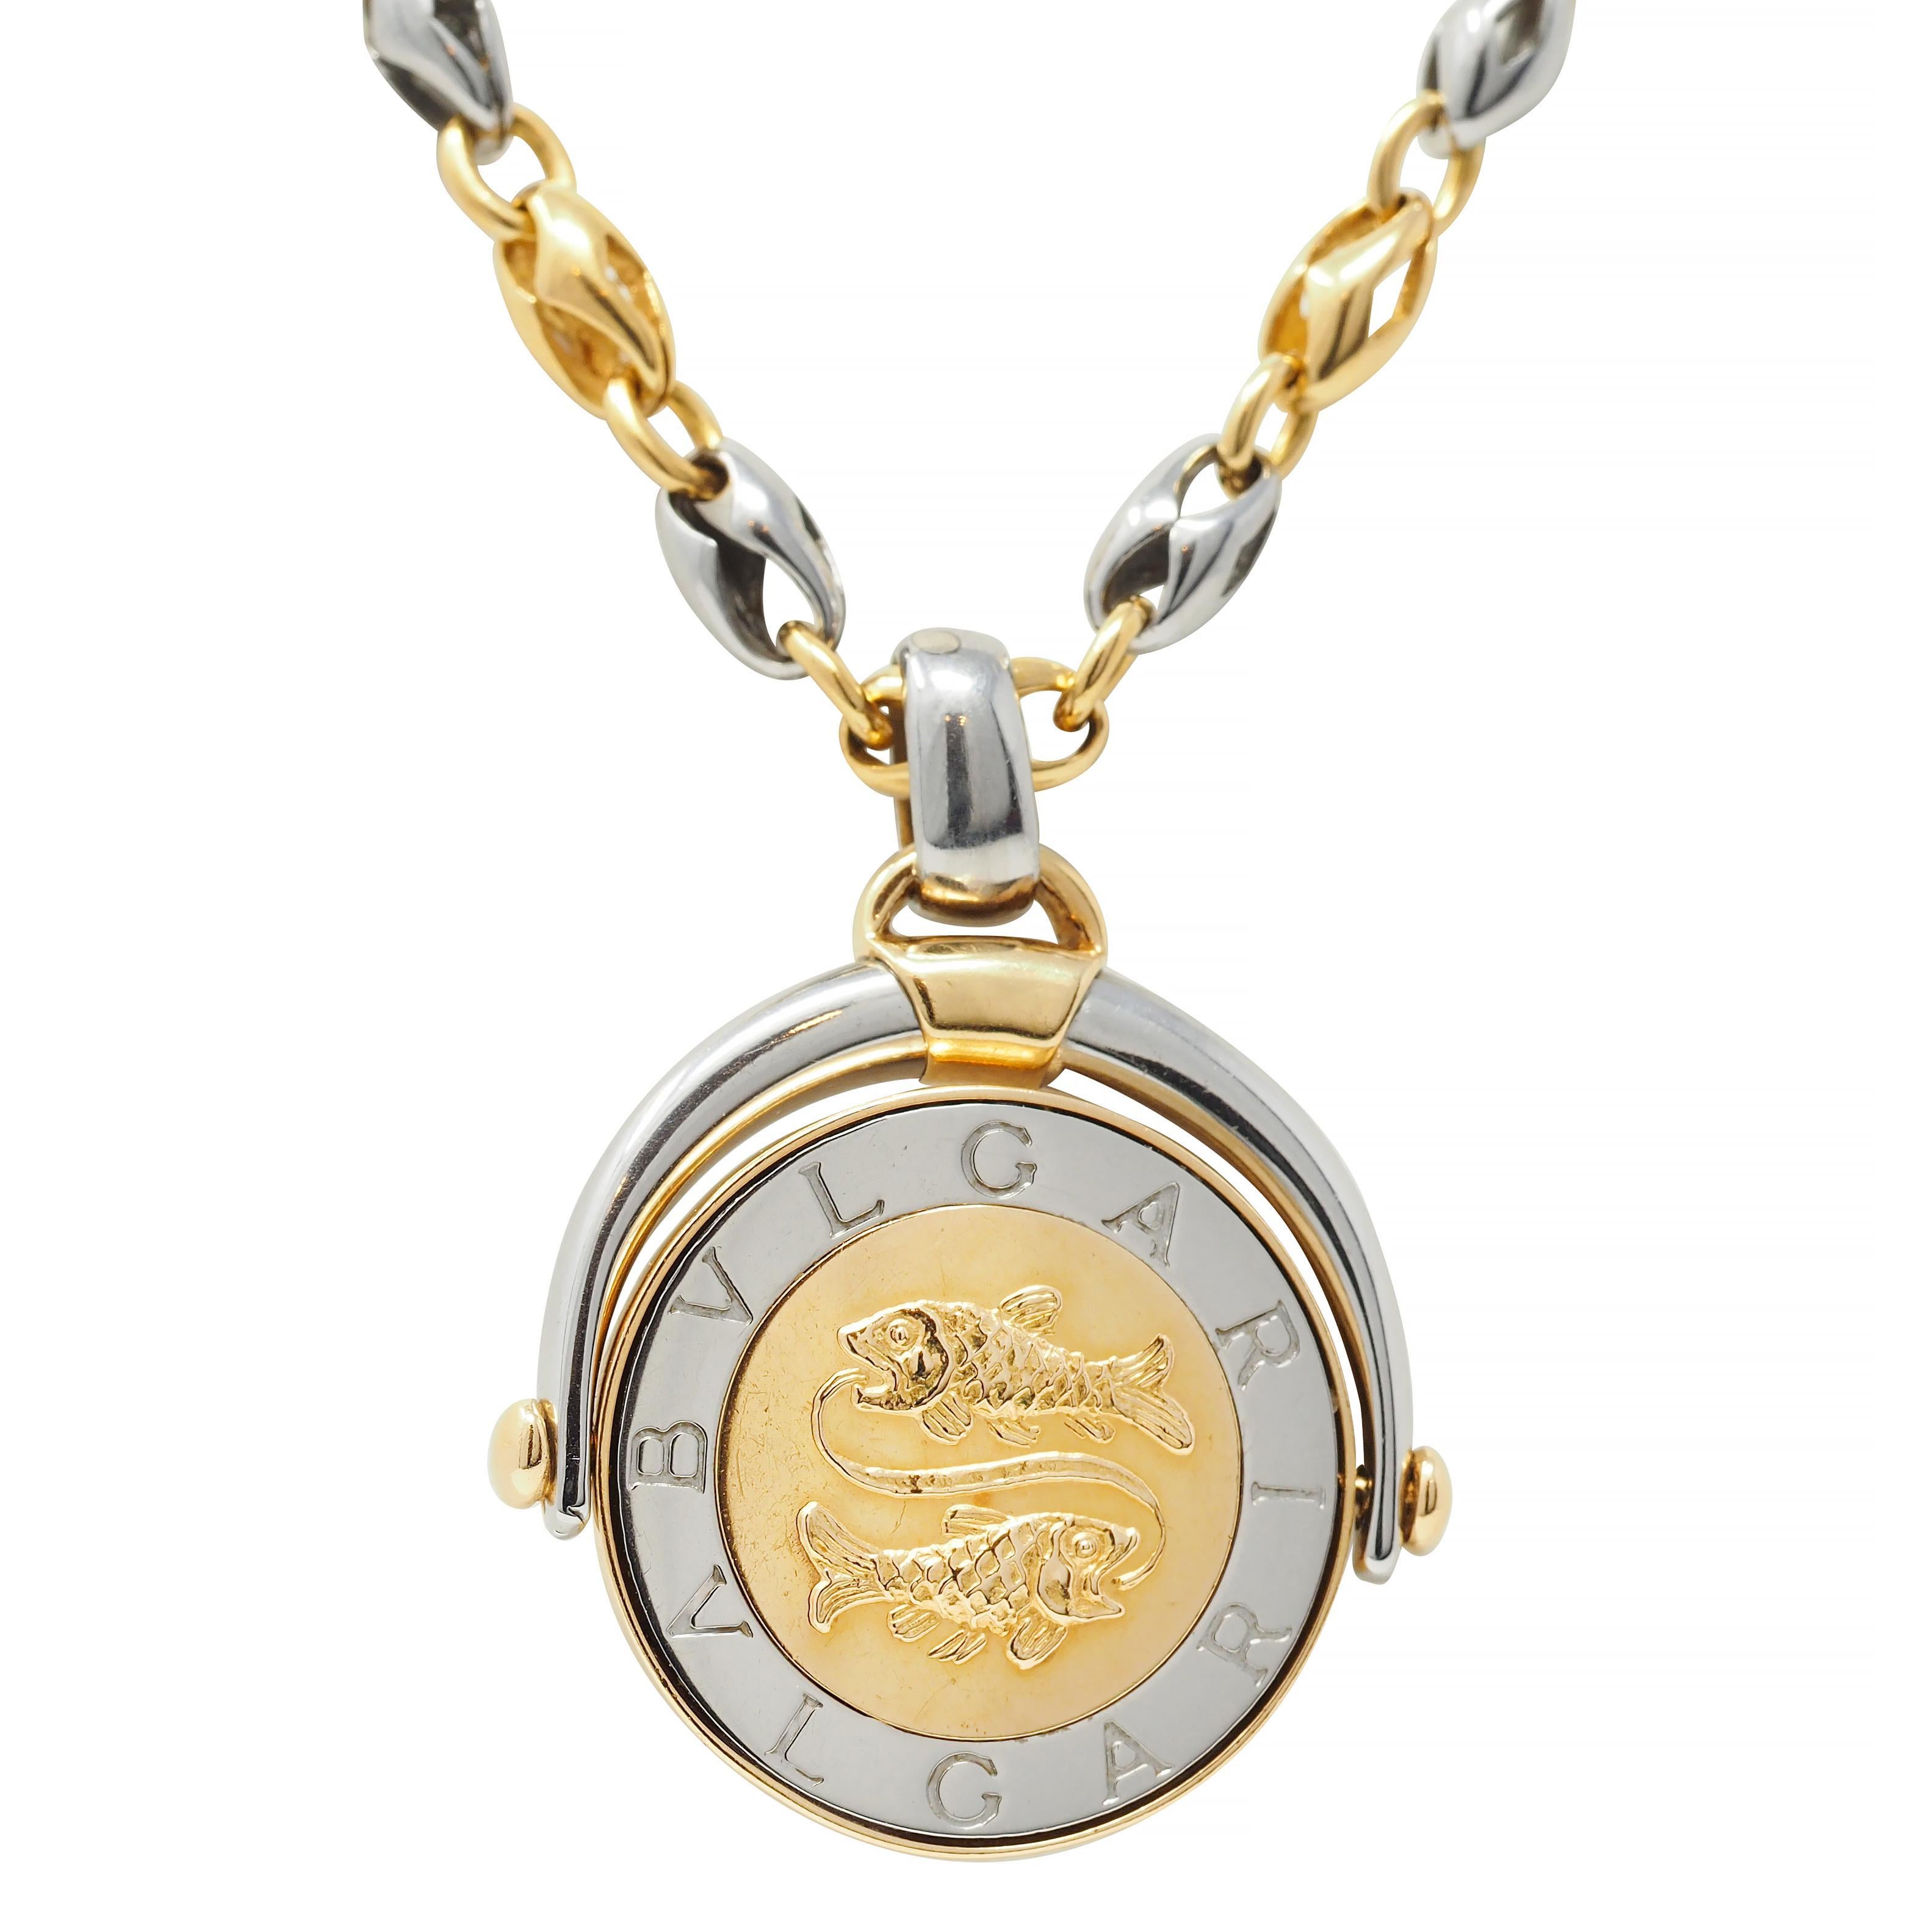 Comprised of a stylized yellow gold and stainless steel mariner link chain suspending a round disk pendant 
Centering a raised two fish motif for the astrological sign Pisces - with stainless steel logo engraved surround
Flips on an axis to reveal